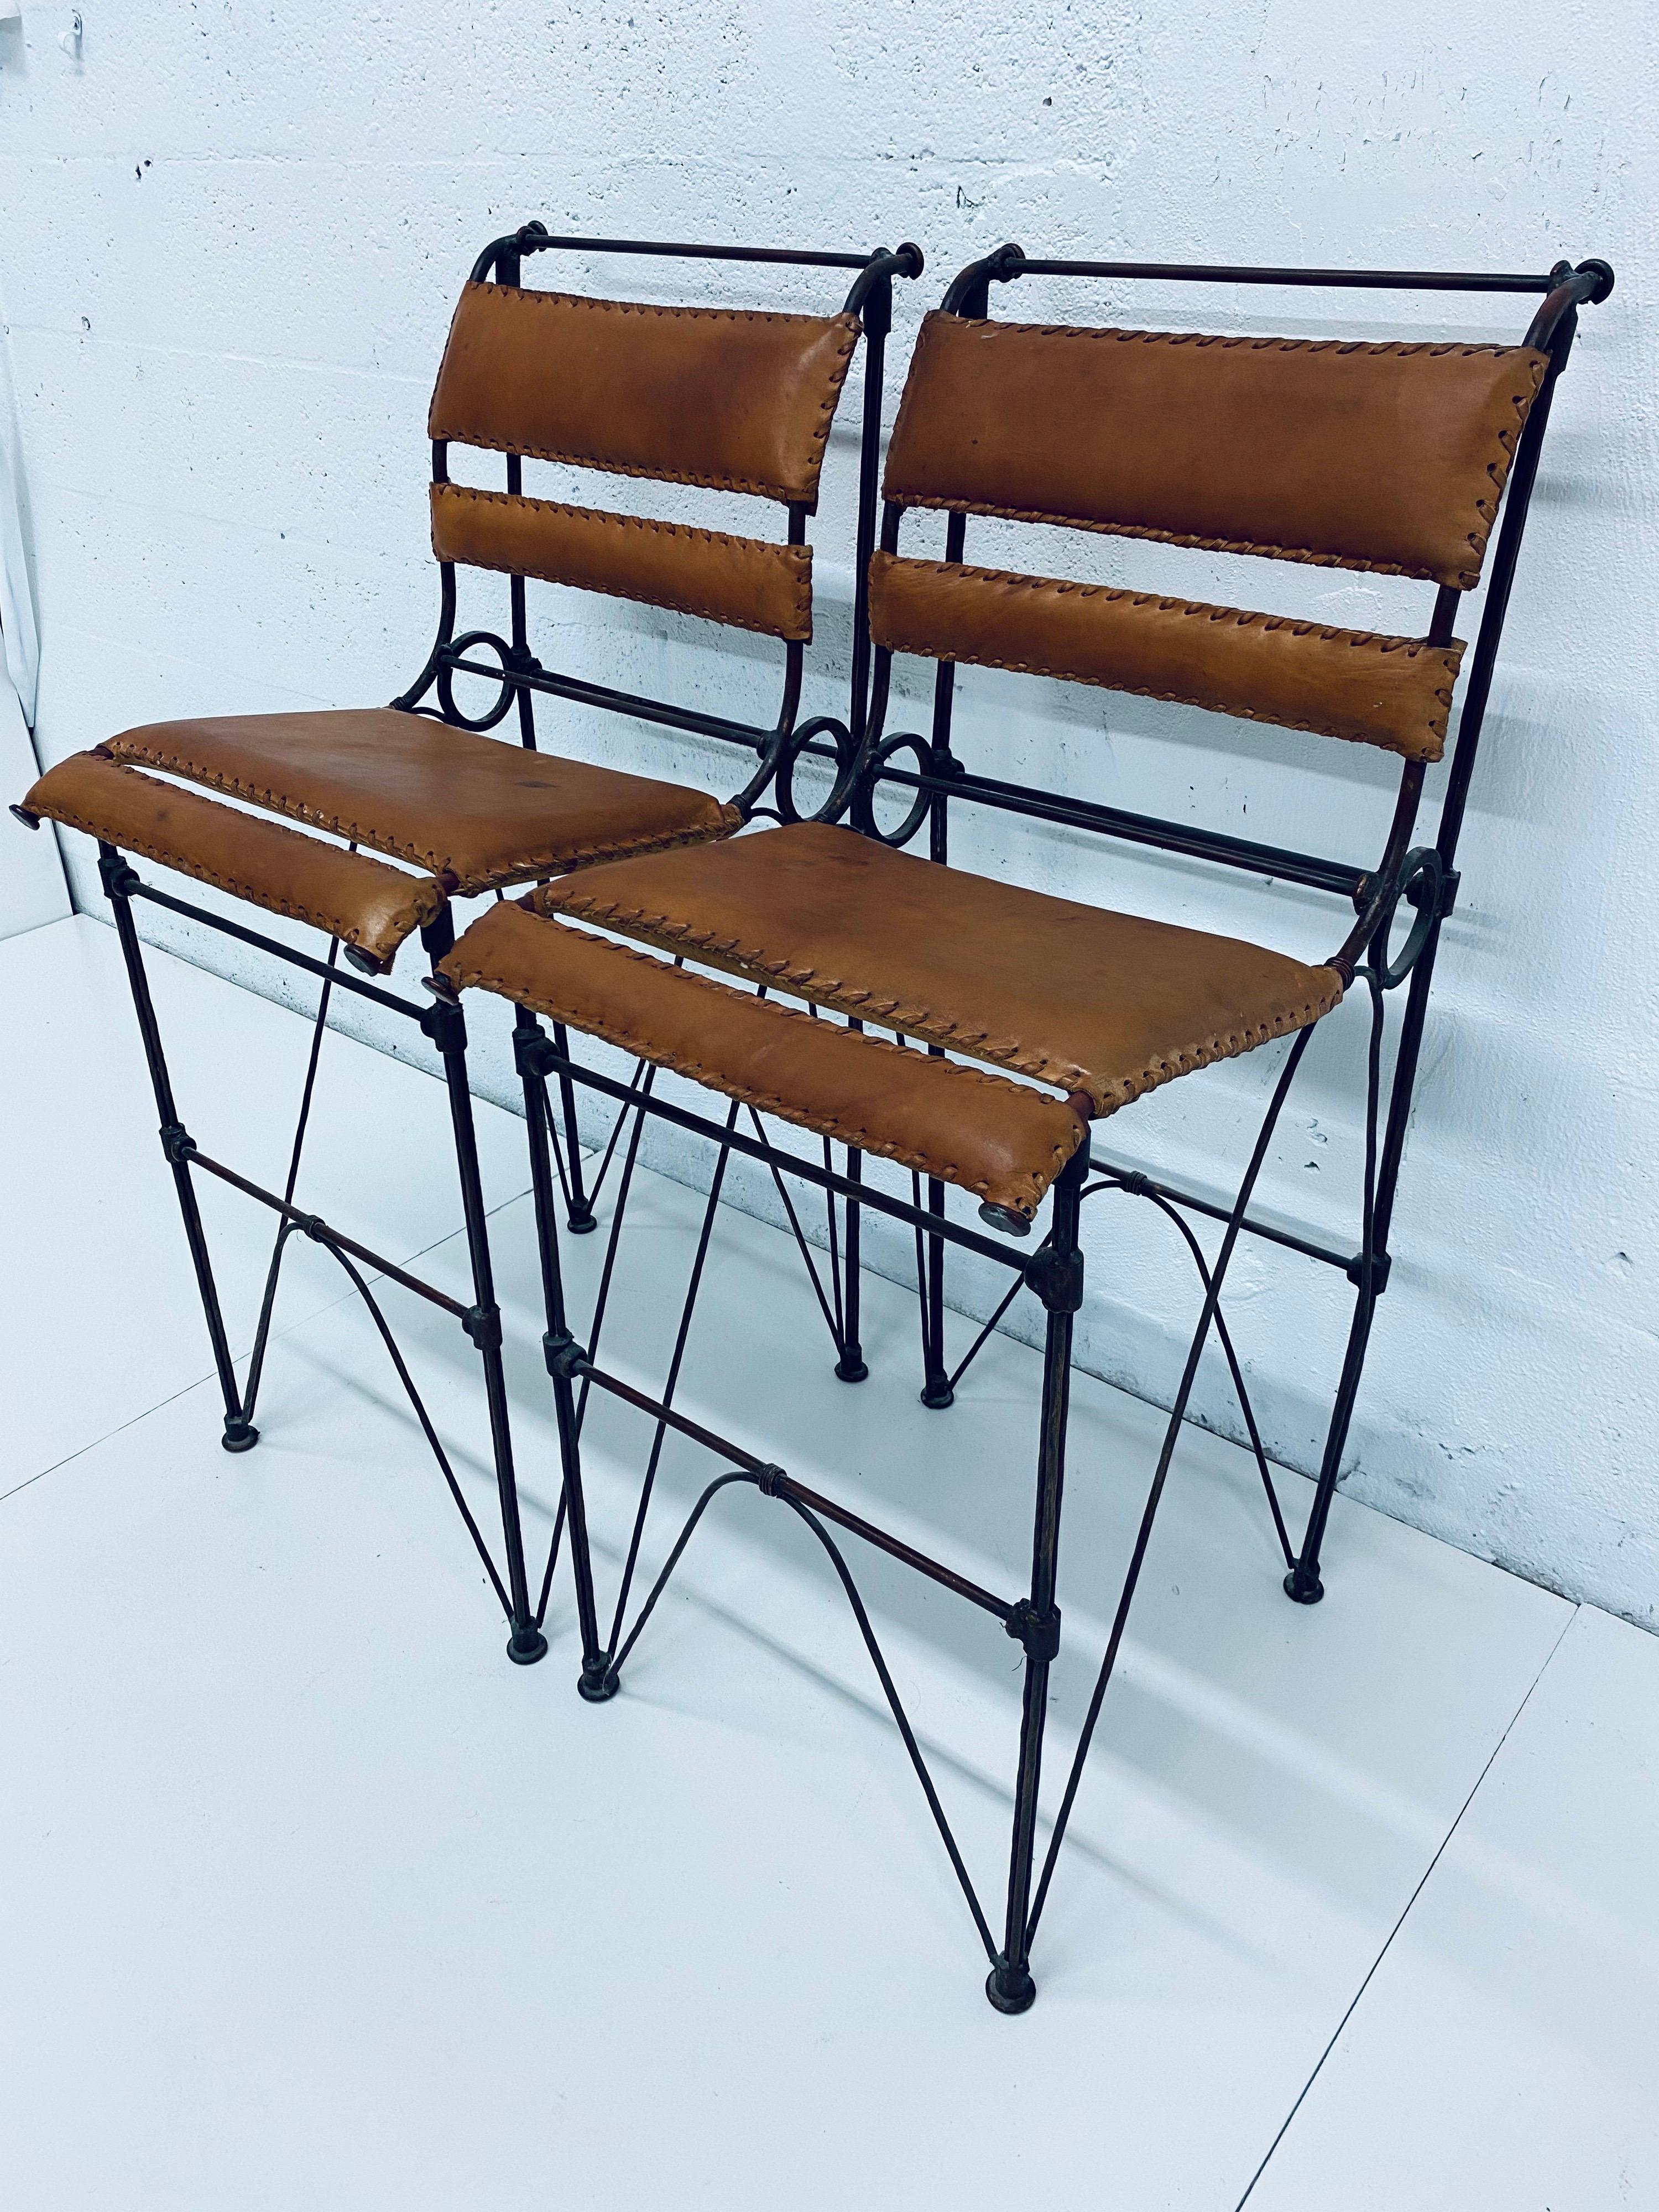 Pair of Ilana Goor attributed brown leather and iron rebar barstools or bar chairs, circa 1970s.